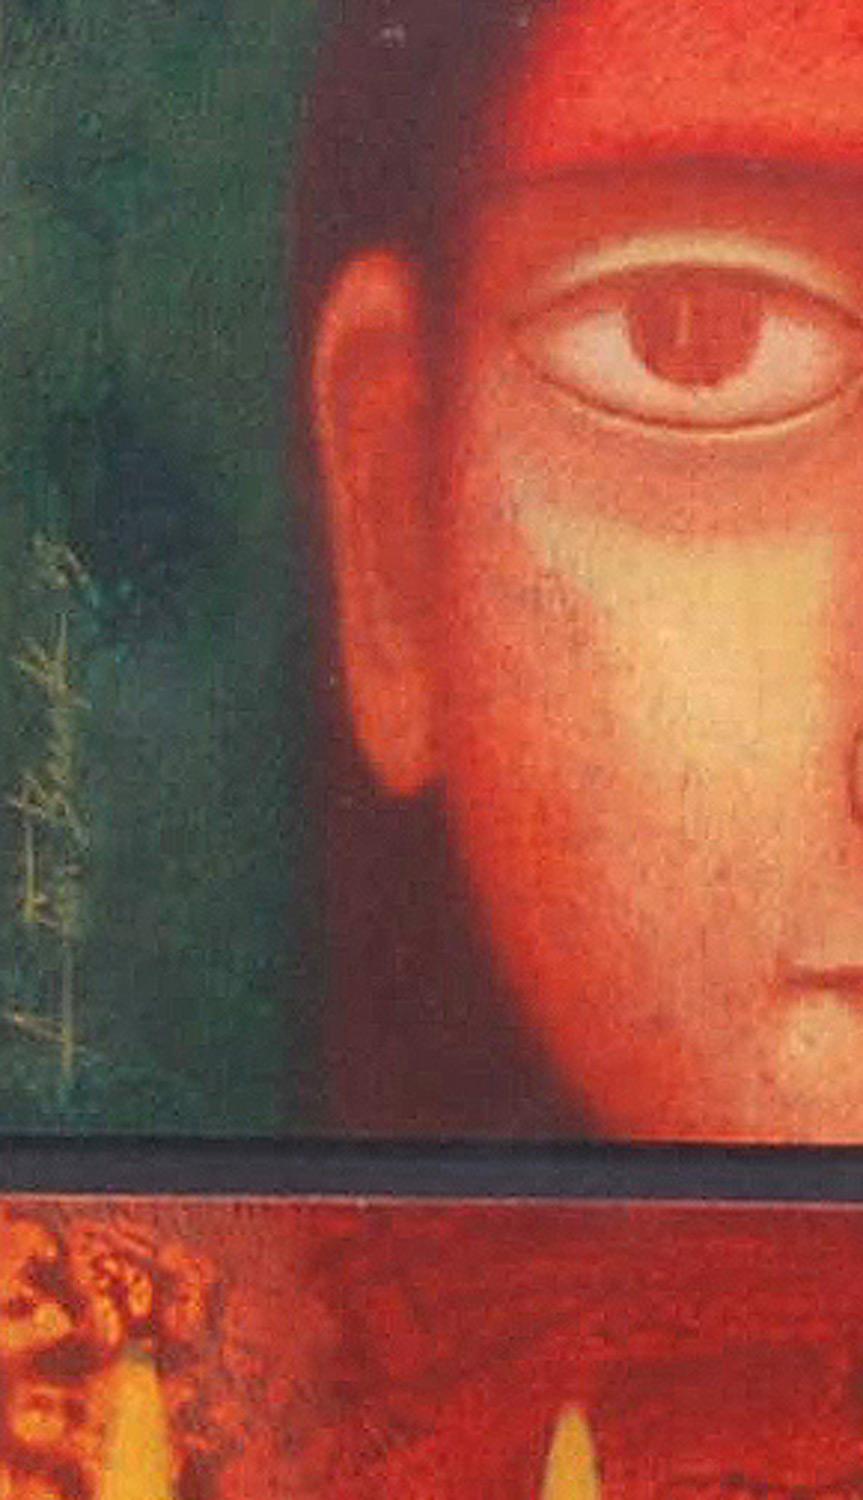 Face, Man, Tempera on Board, Red, Yellow, Green, Contemporary Artist 